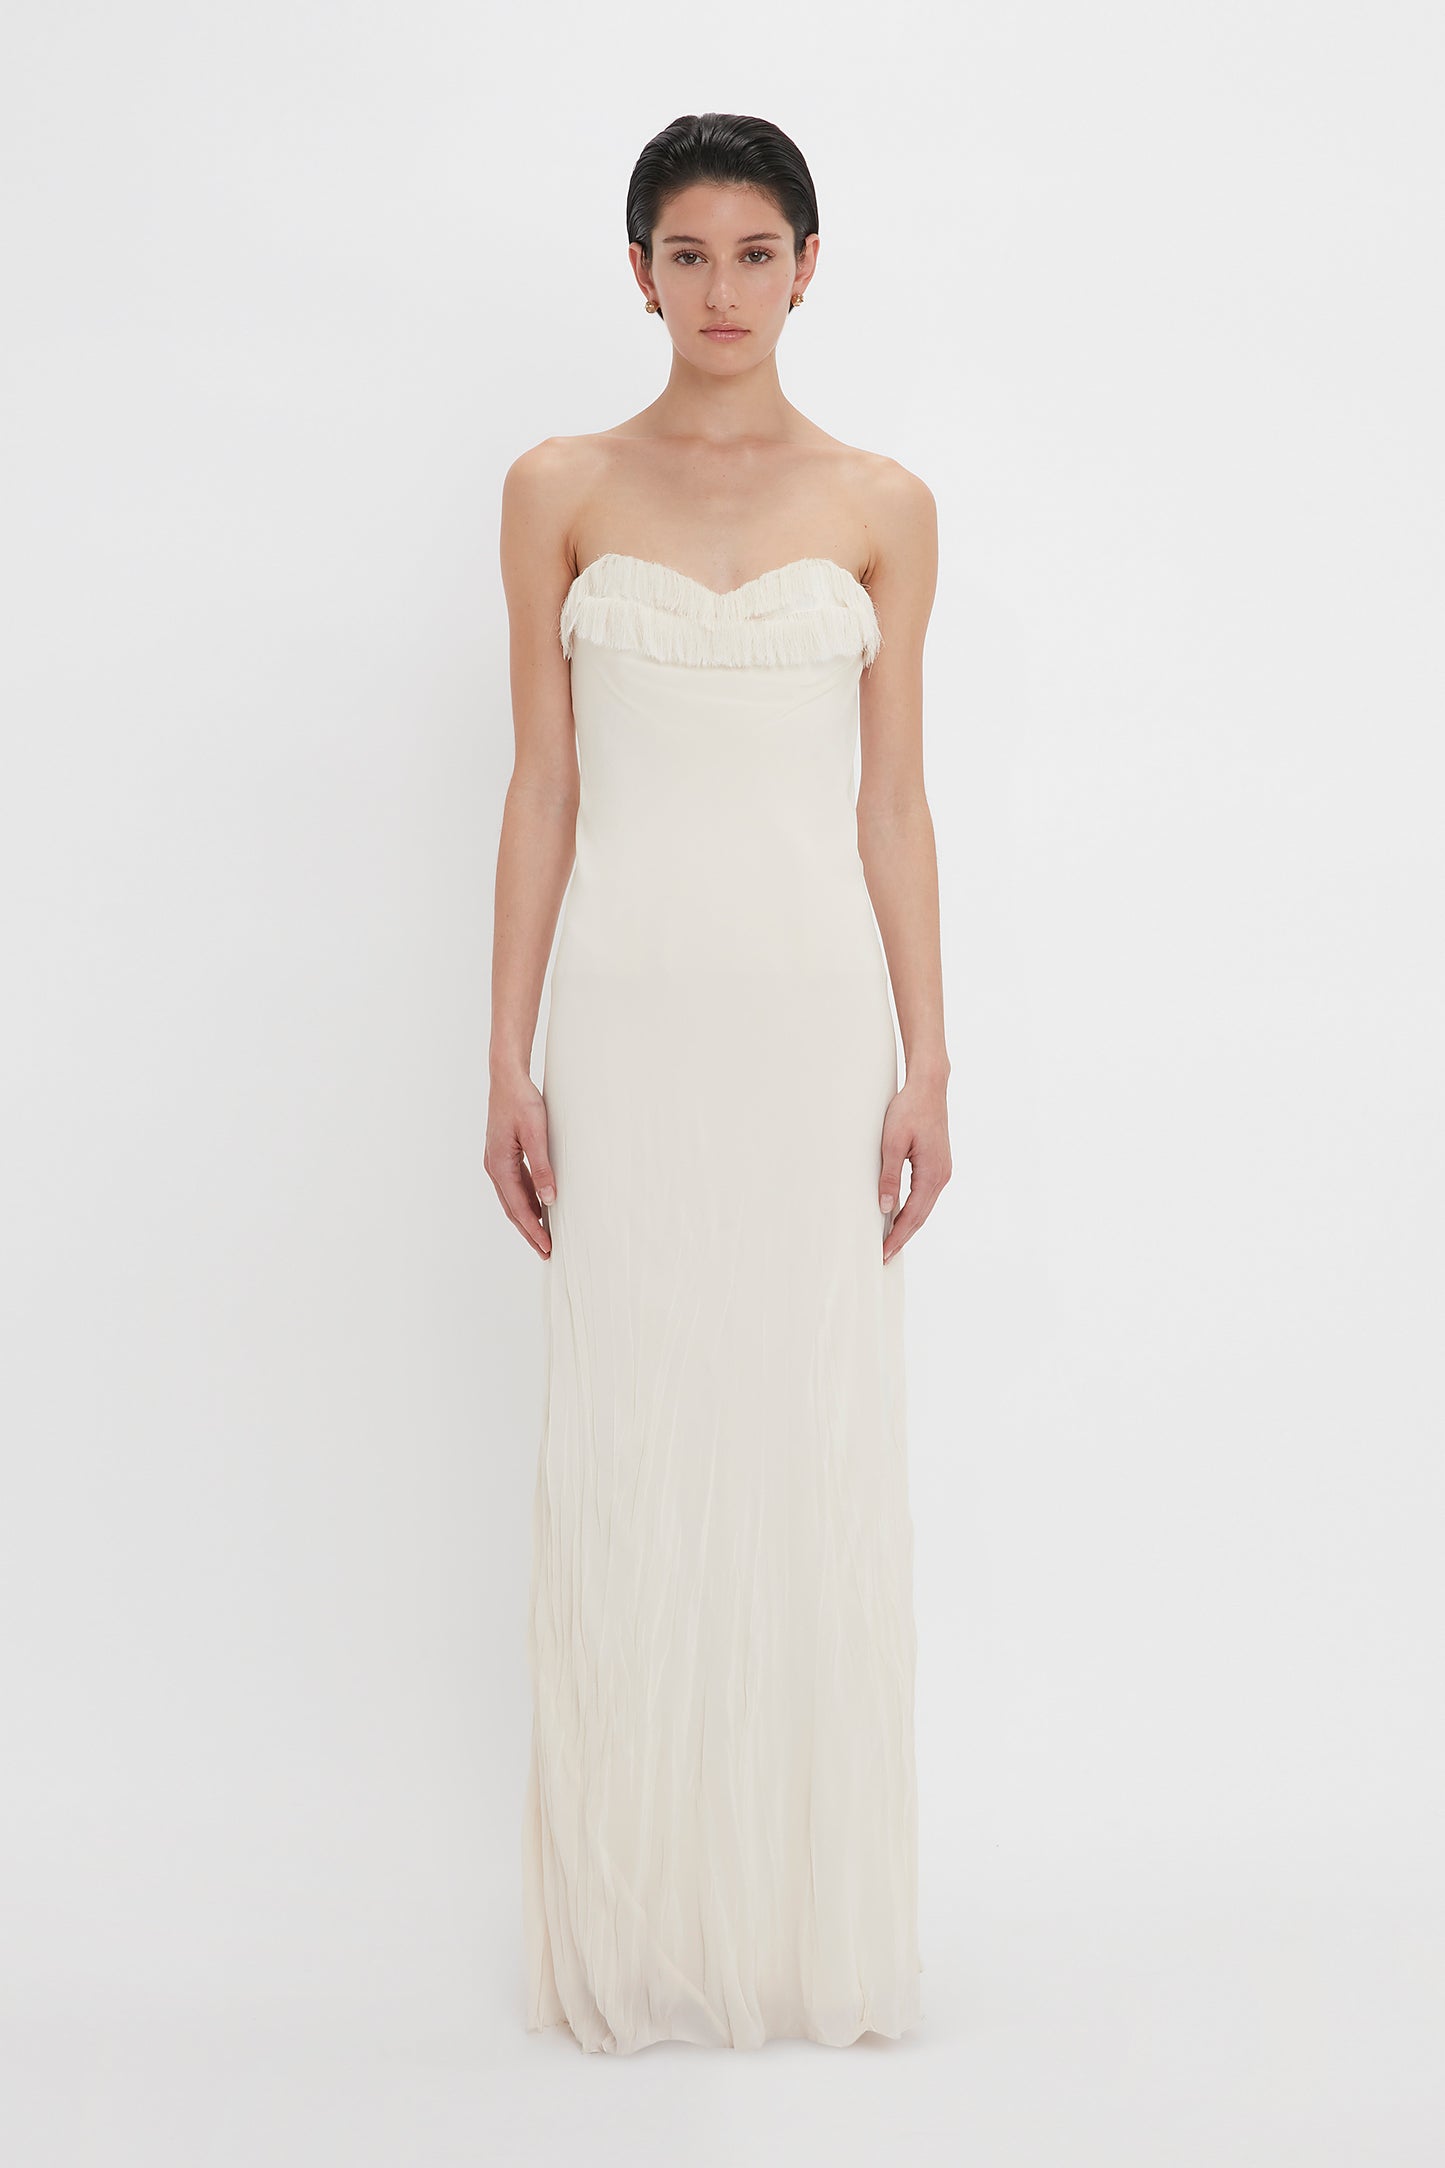 A woman in a strapless Victoria Beckham Exclusive Floor-Length Corset Detail Gown In Ivory stands against a plain white background, looking directly at the camera.